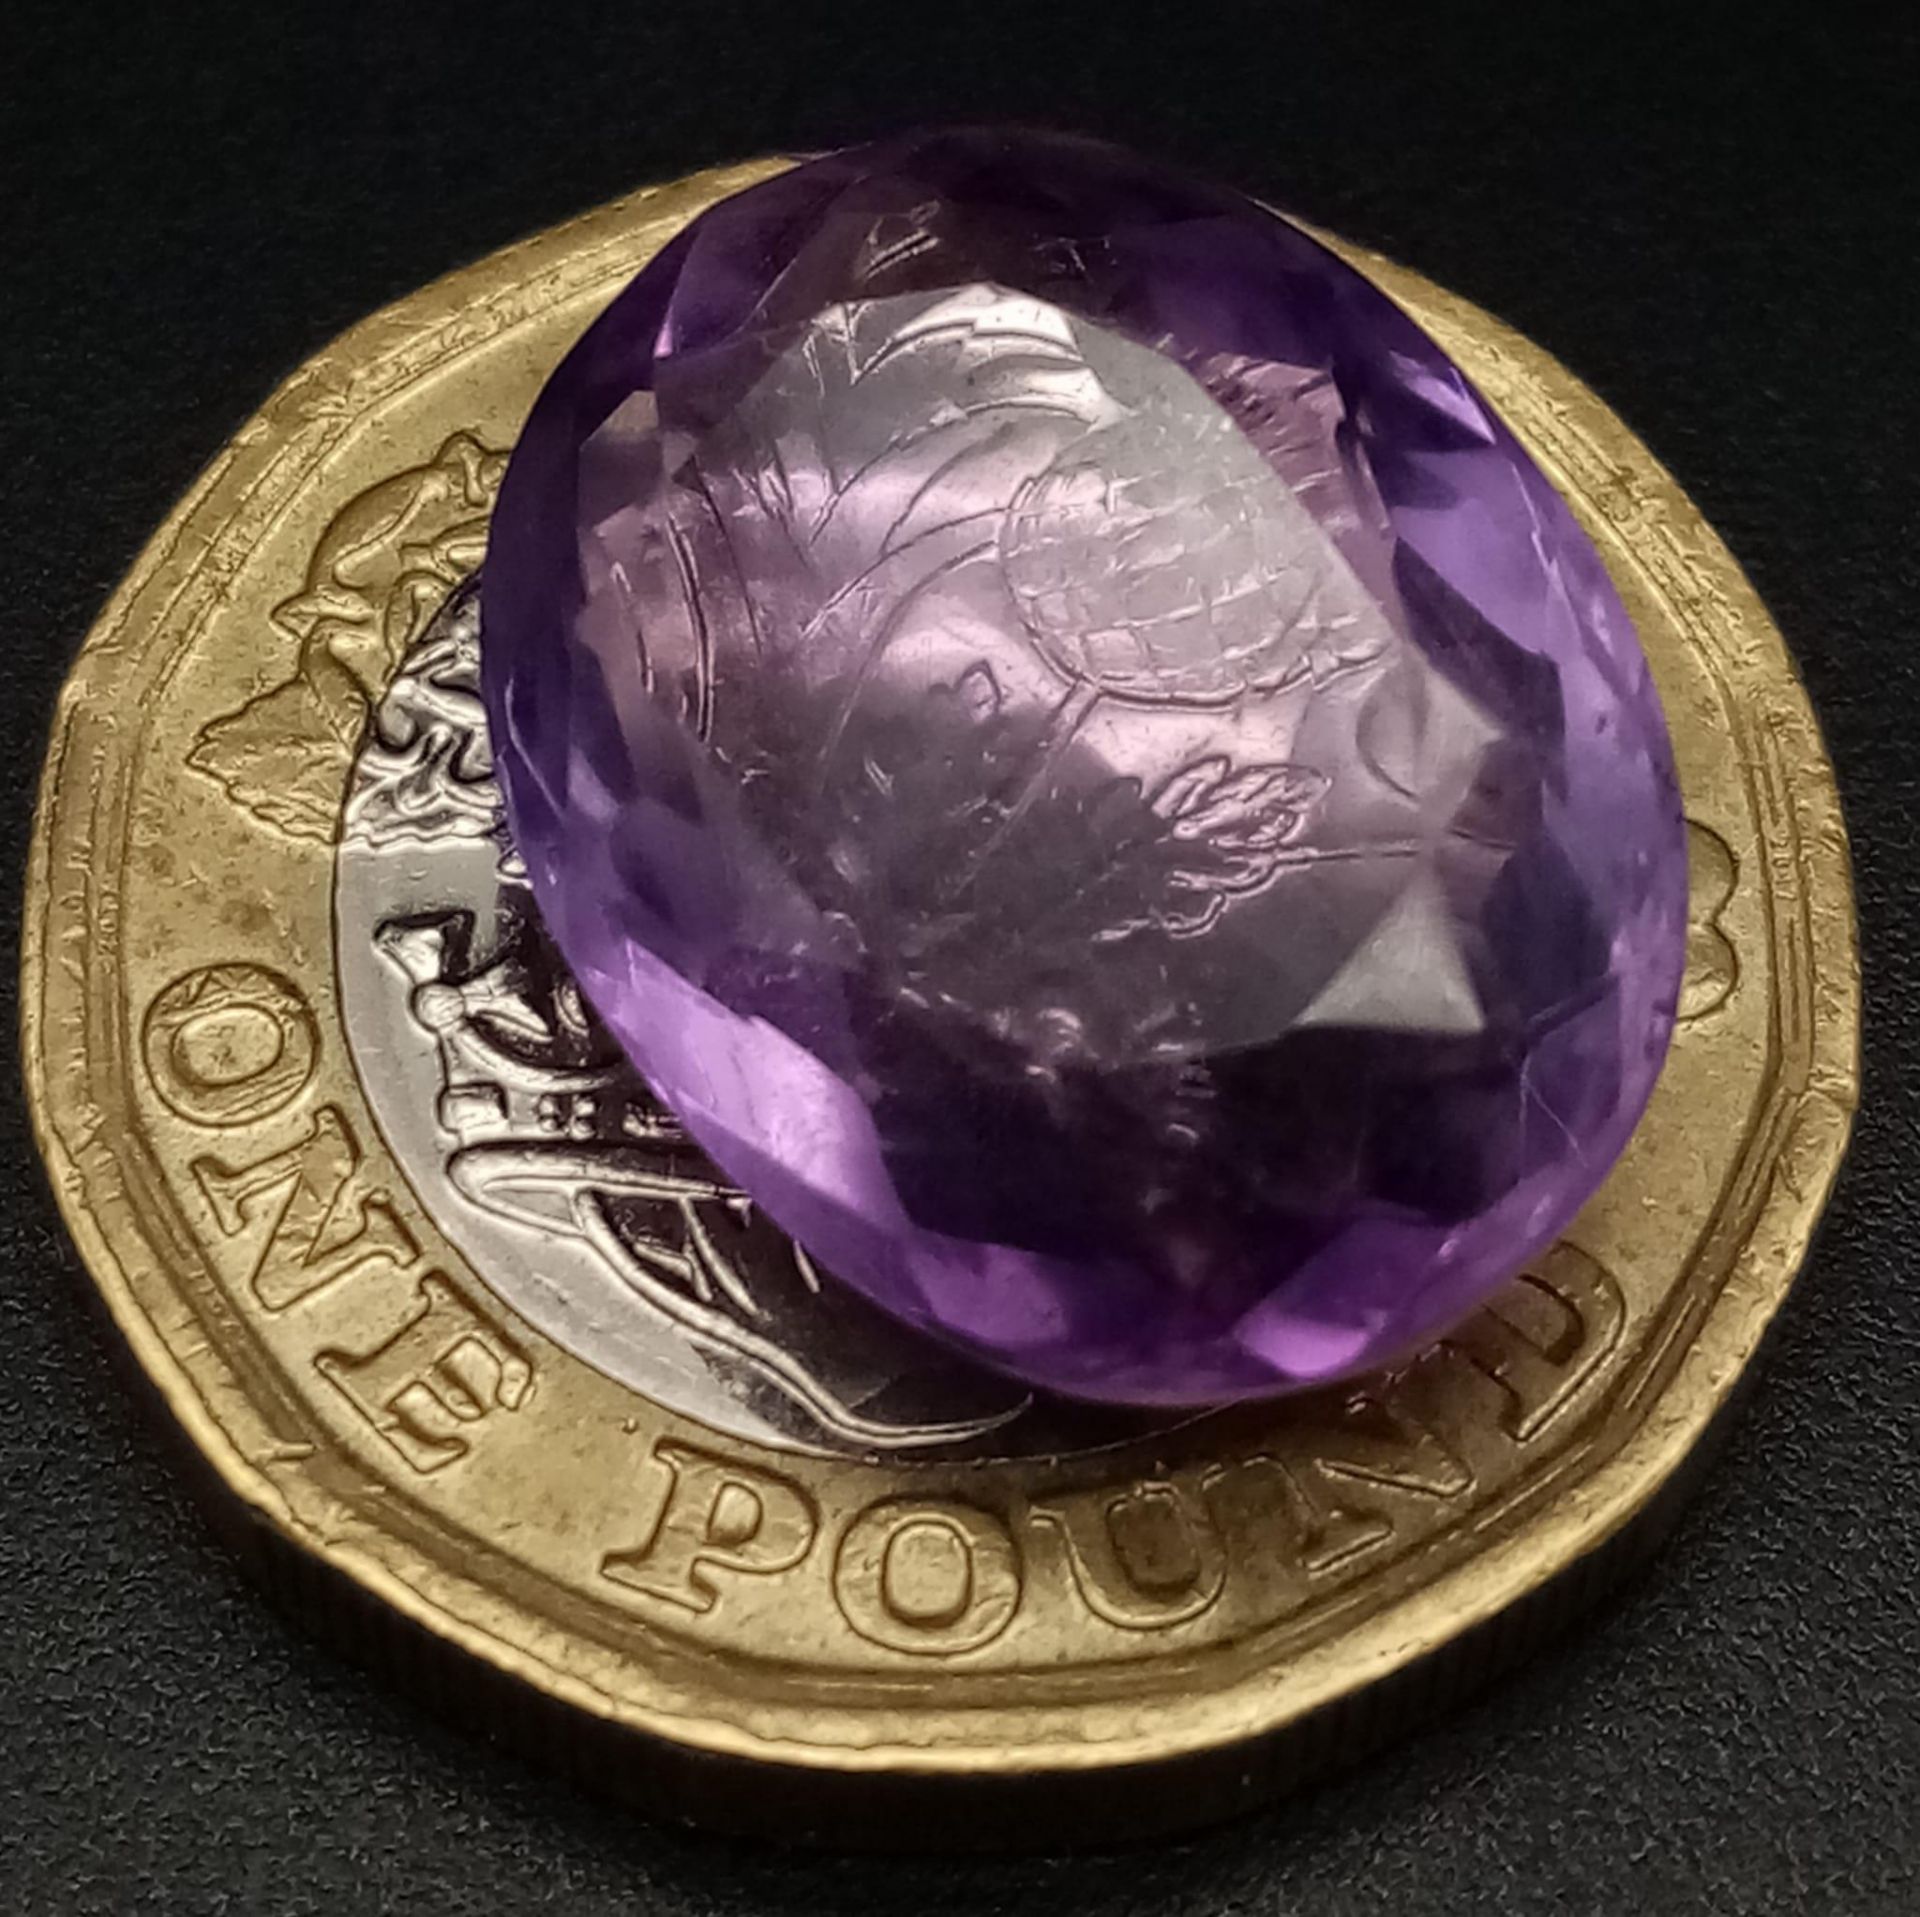 A 9.65ct, Oval Shape, Faceted Amethyst Gemstone. IGL&I Certified. - Image 3 of 4